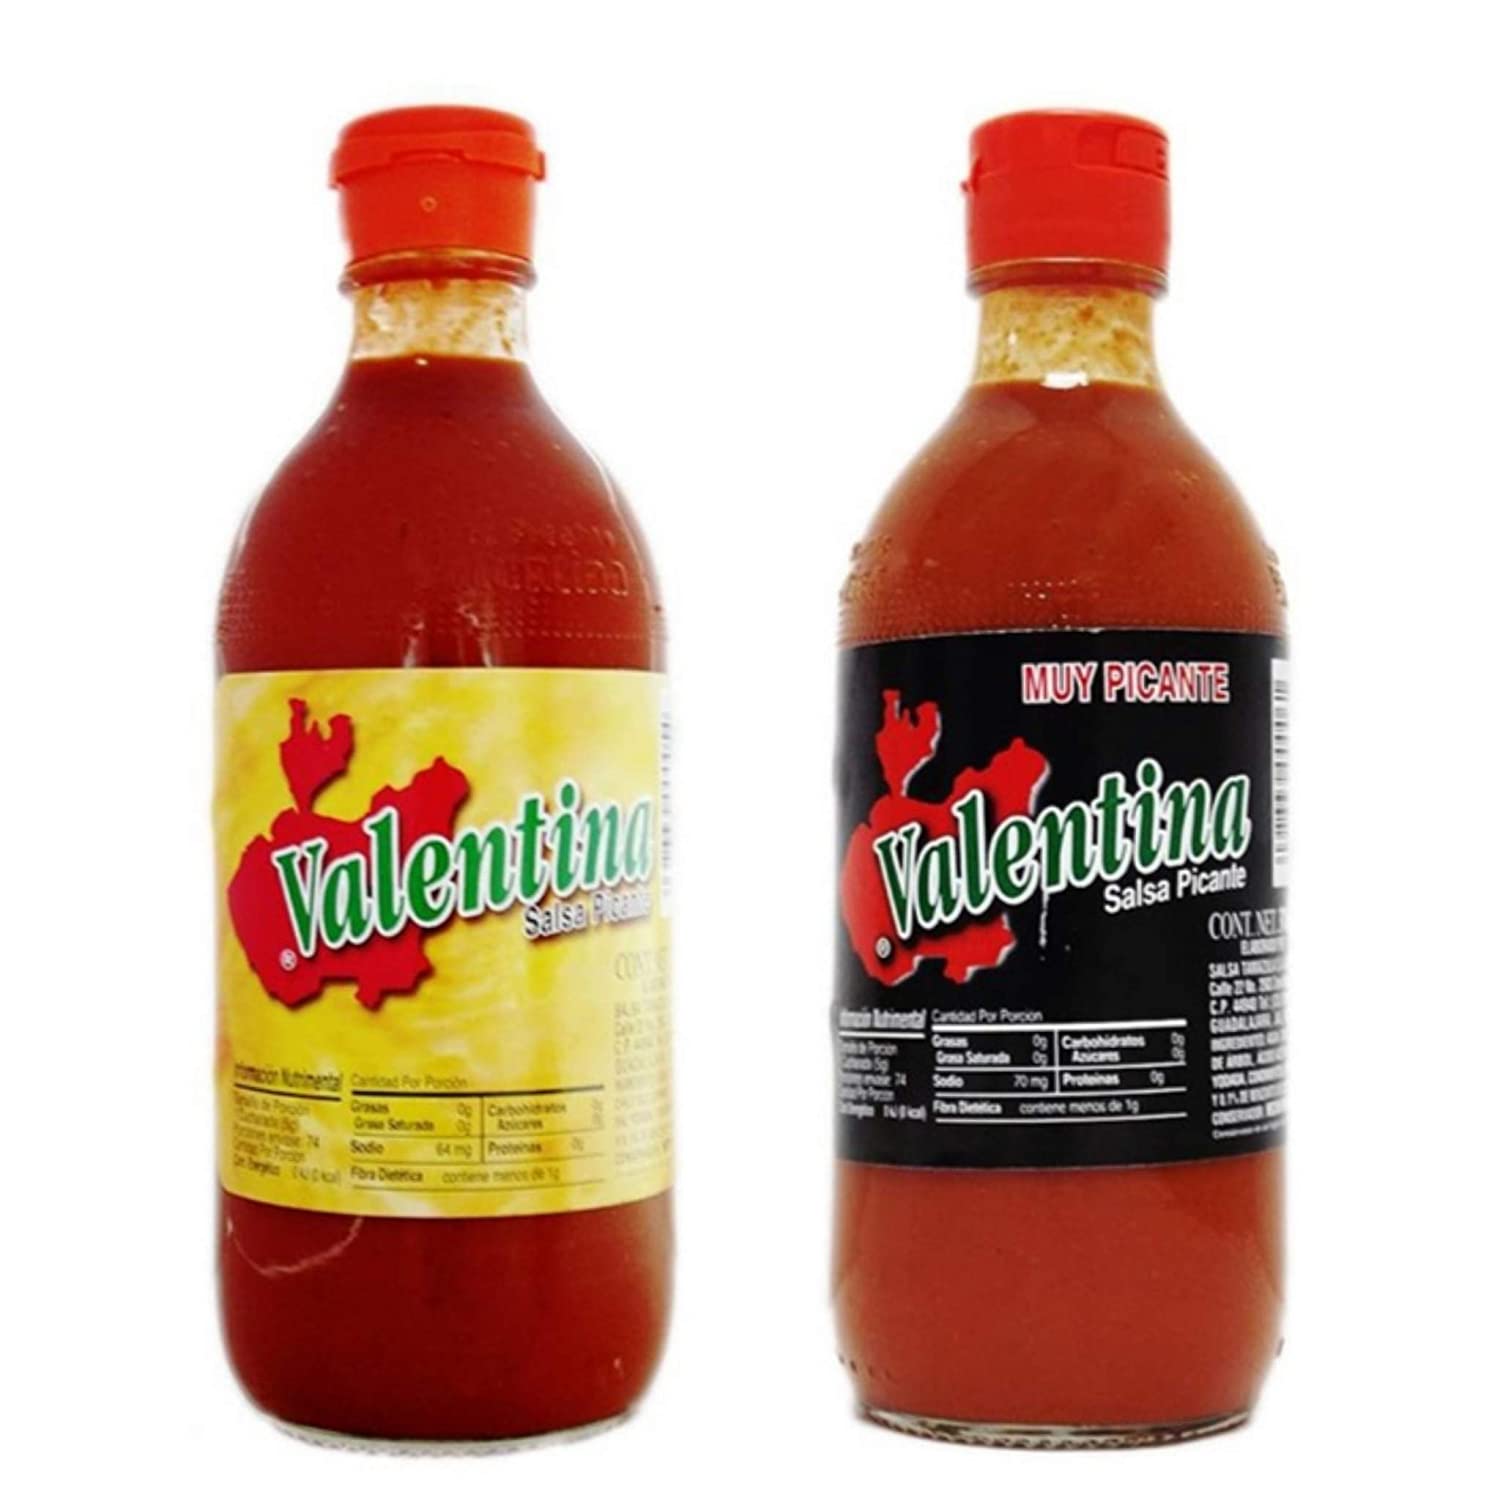 The ingredients of the Valentina Sauce